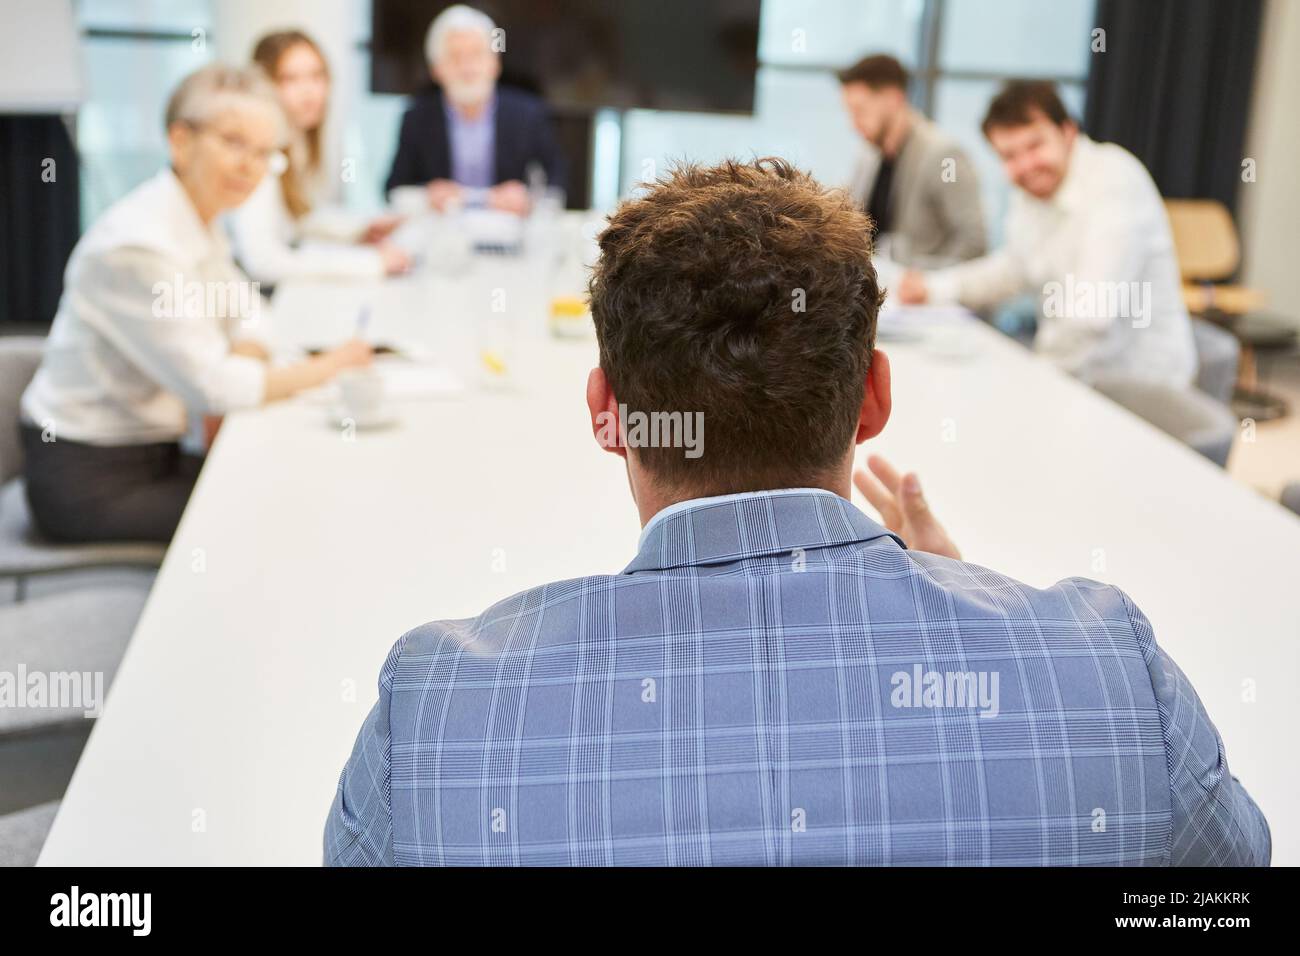 Businessman as applicant at job interview with employer at conference table Stock Photo